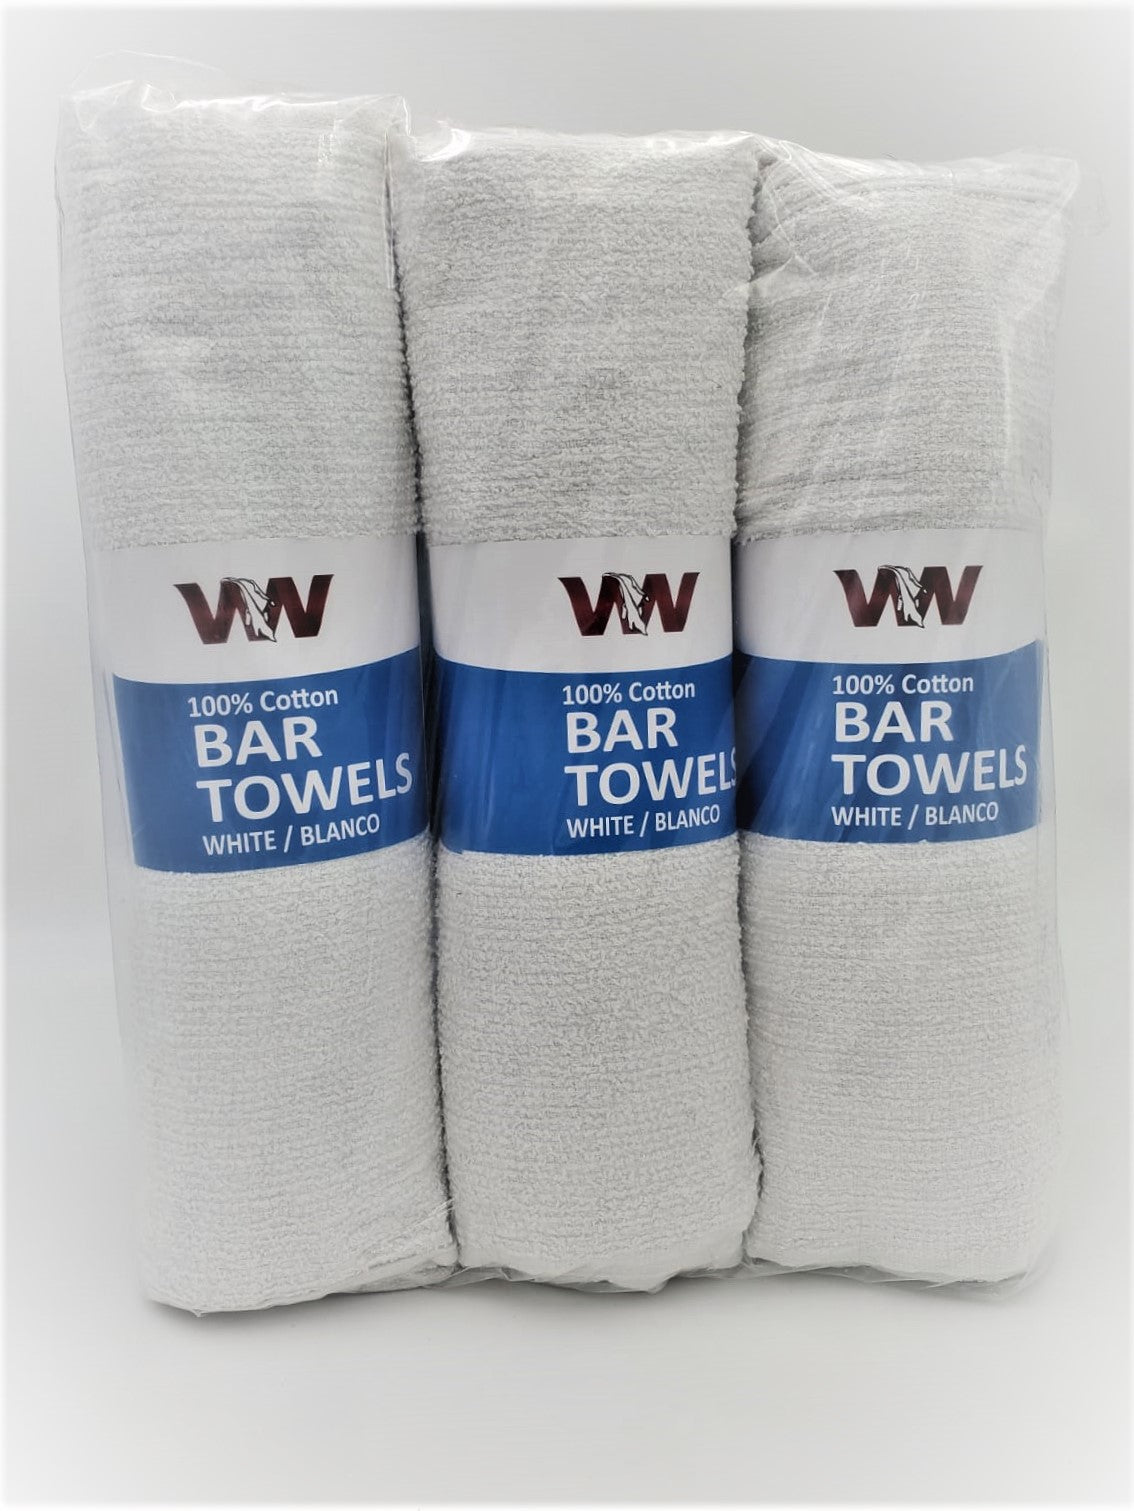 Affordable Wipers Terry Cotton Bar Towels - 6 Rolls of 12 (Doz) Retail Packaging